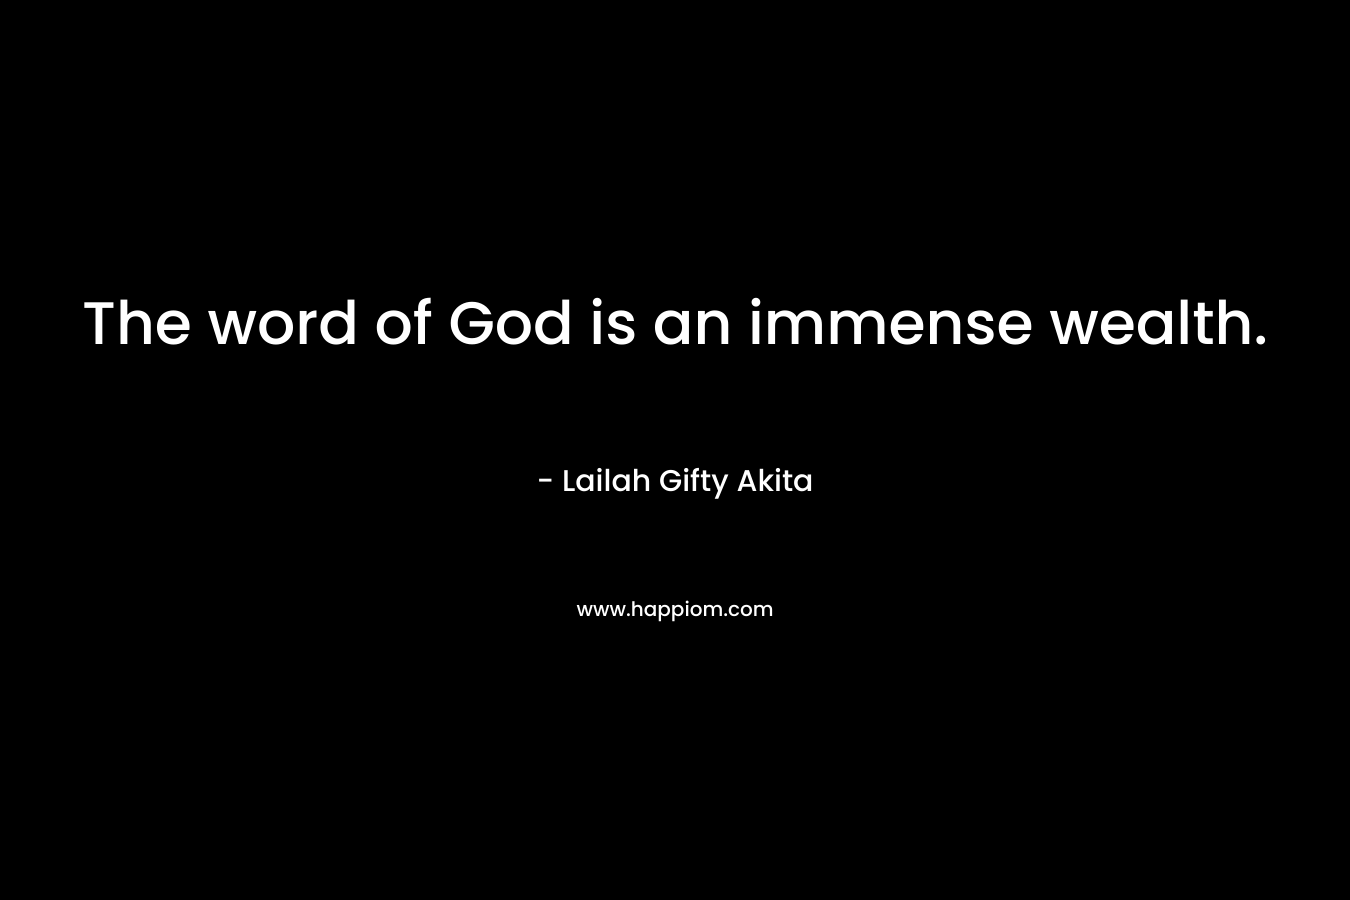 The word of God is an immense wealth.